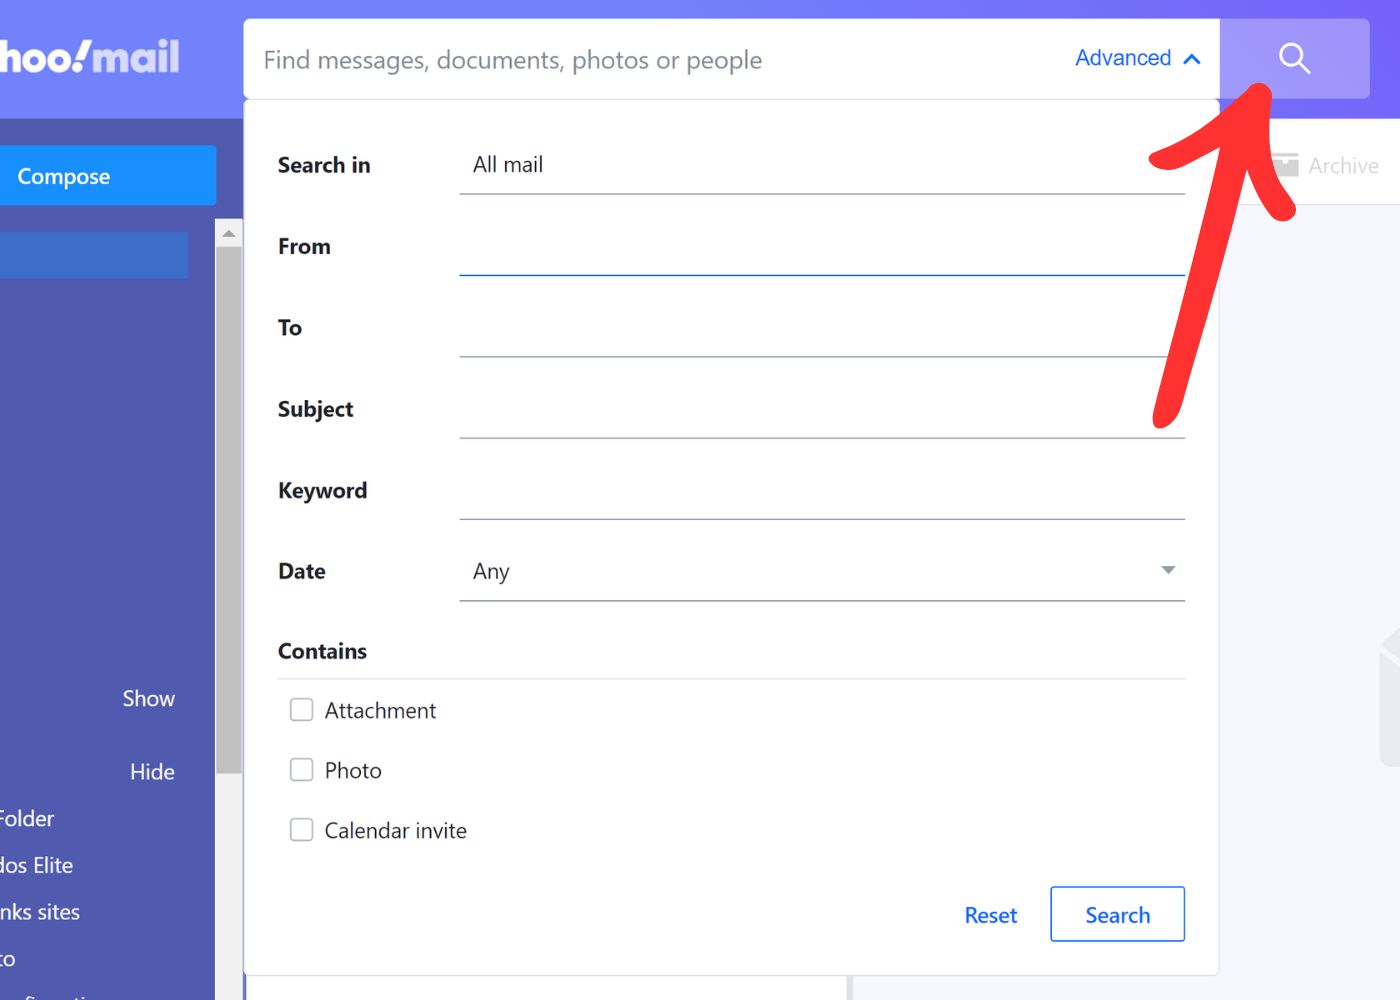 How to Search for Messages in Yahoo Mail